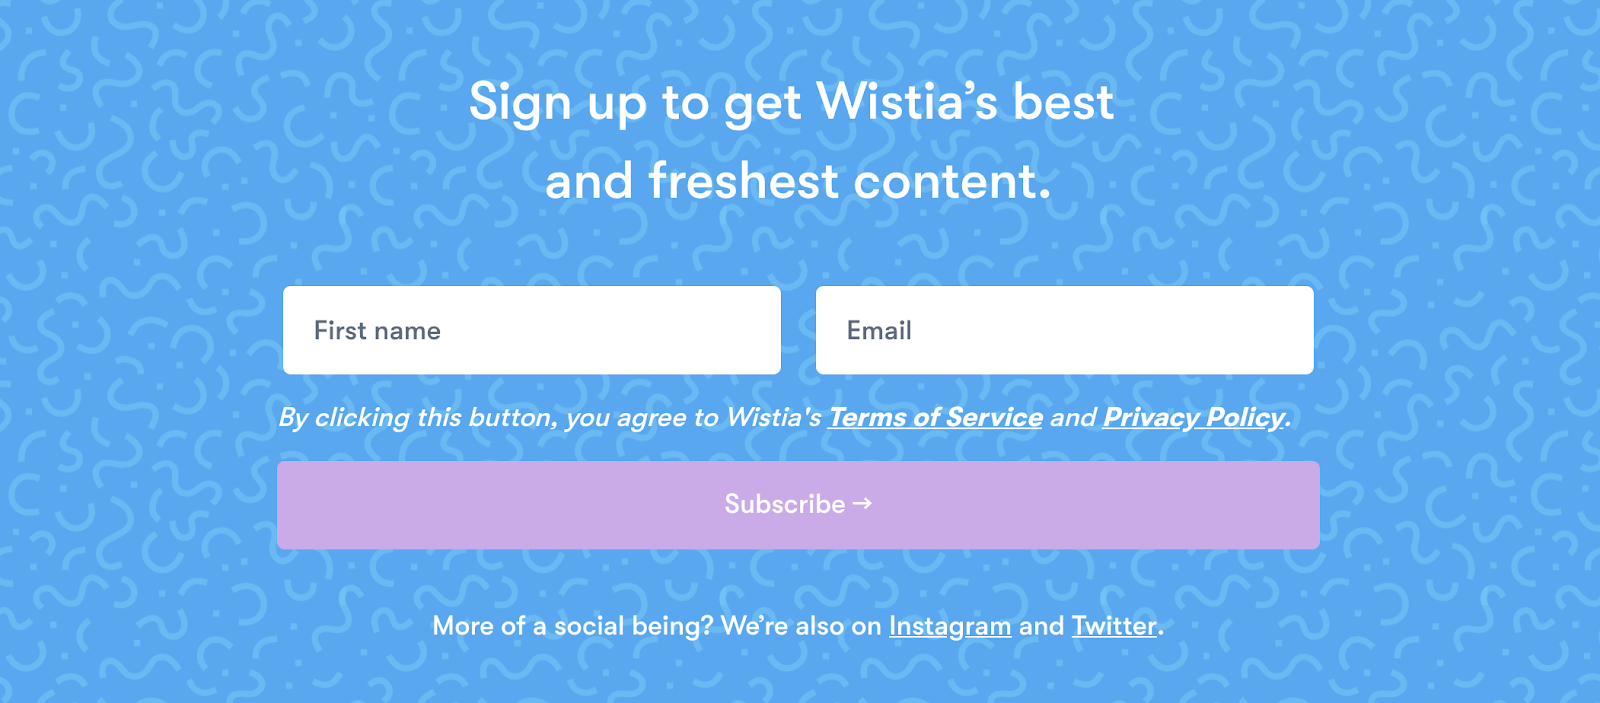 Screenshot of Wistia blog post featuring an email list subscription